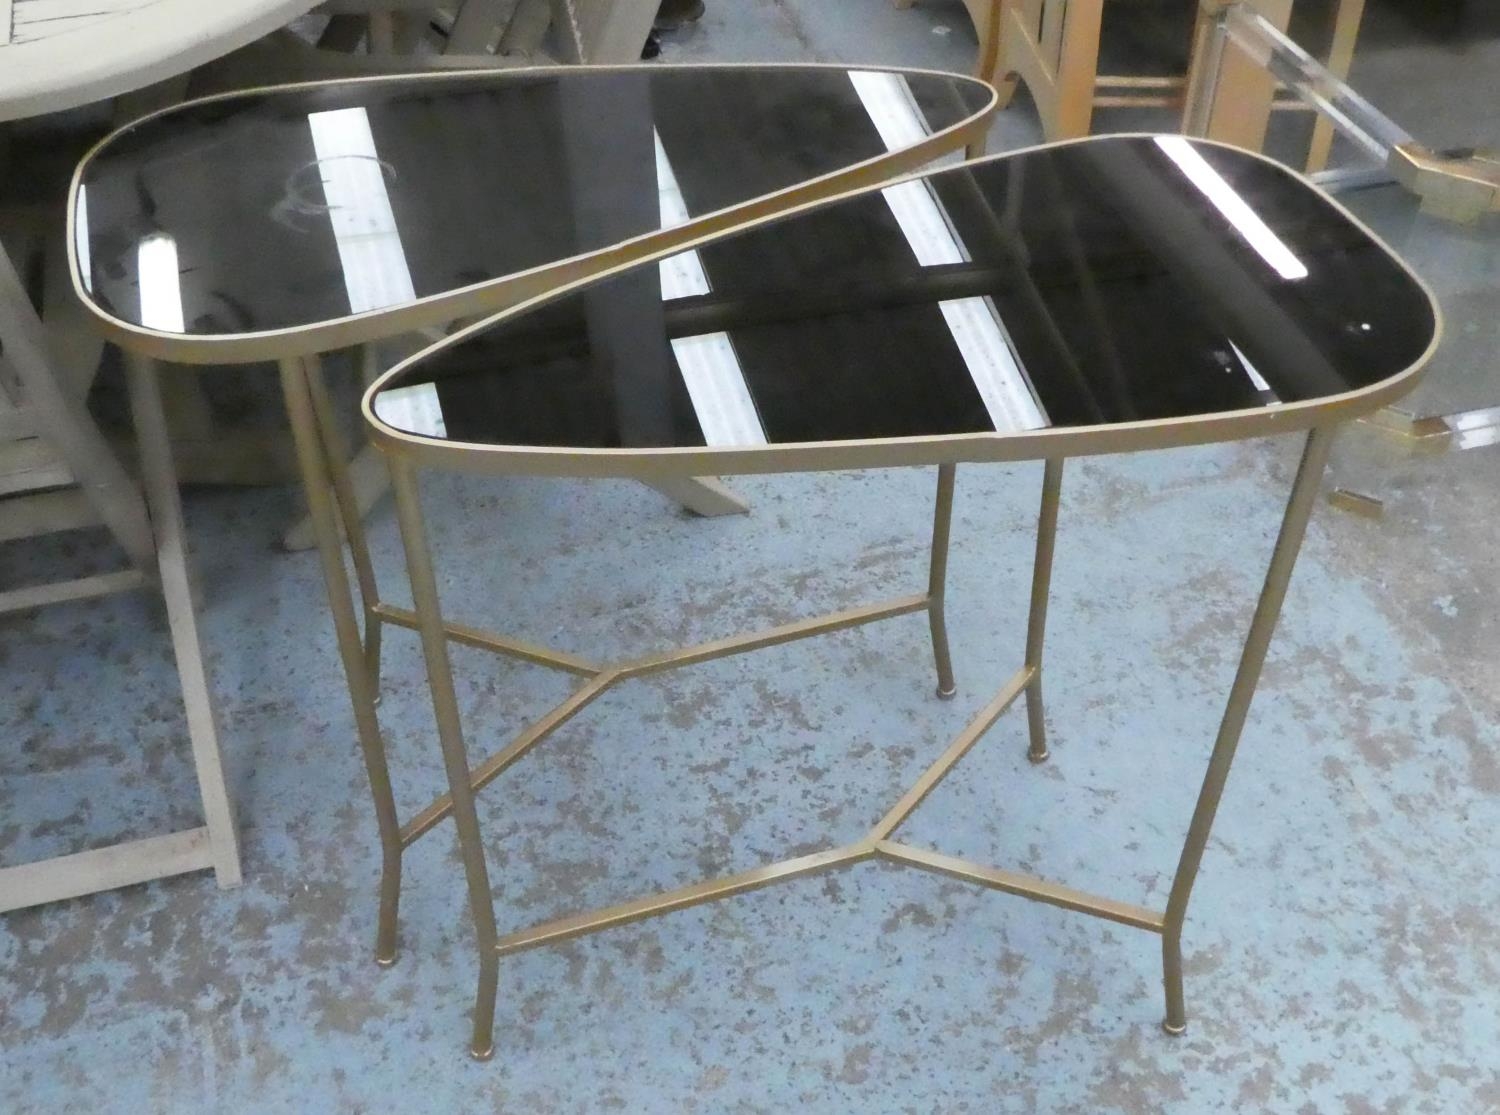 SIDE TABLES, a pair, 1950's Italian style, gilt metal, smoked glass tops, 70cm x 36cm x 71cm. (2)